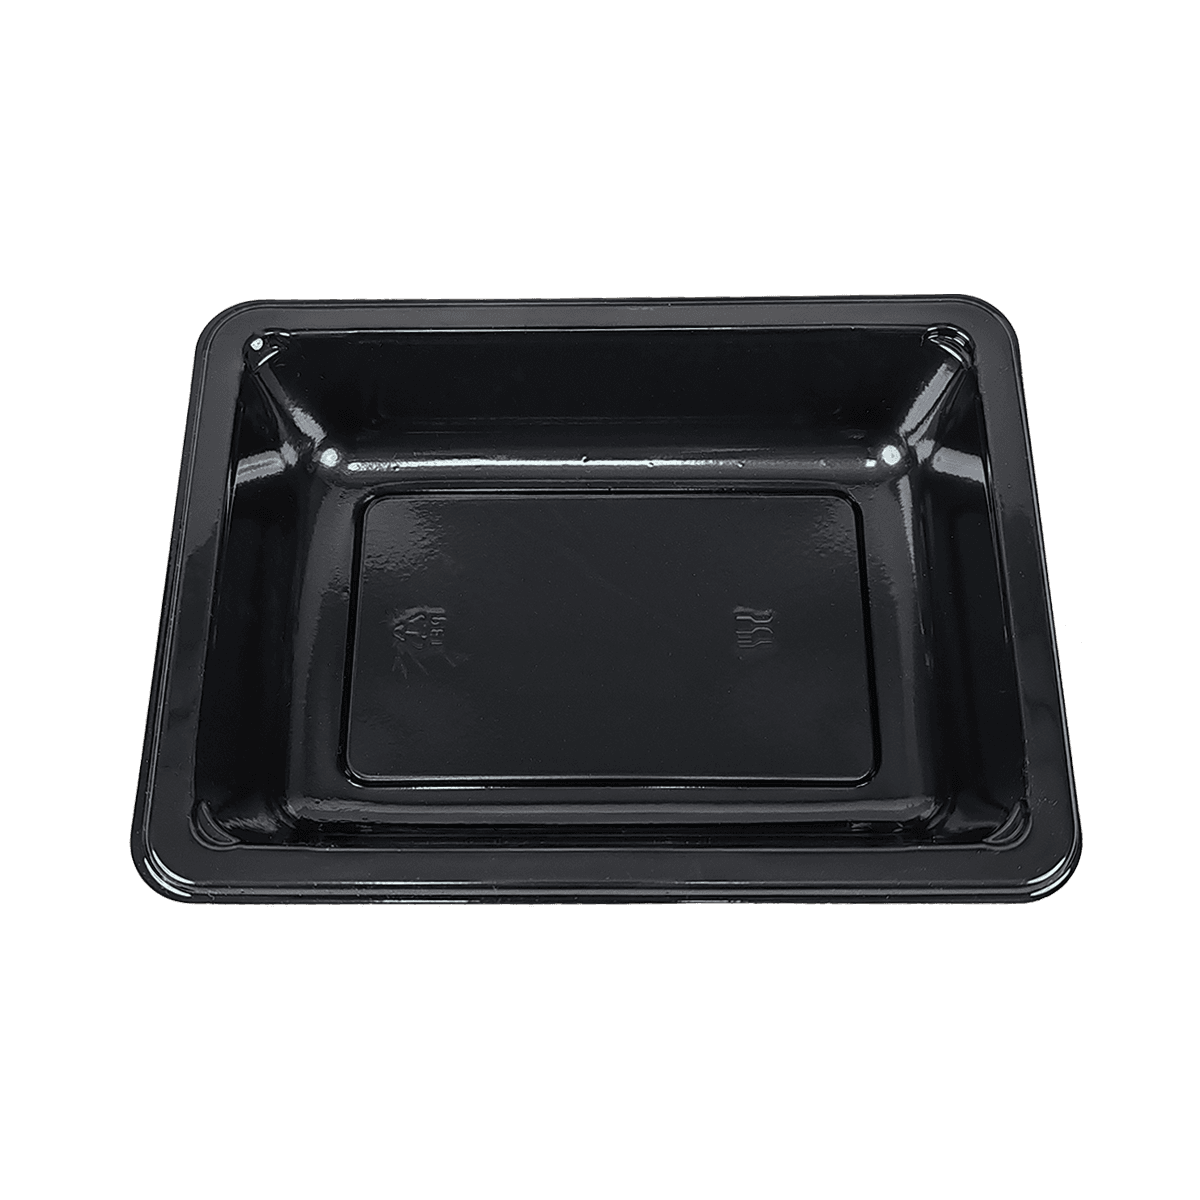 ZK-CPET-X012 Reusable Shrink Packaging Black CPET Packaging Containers